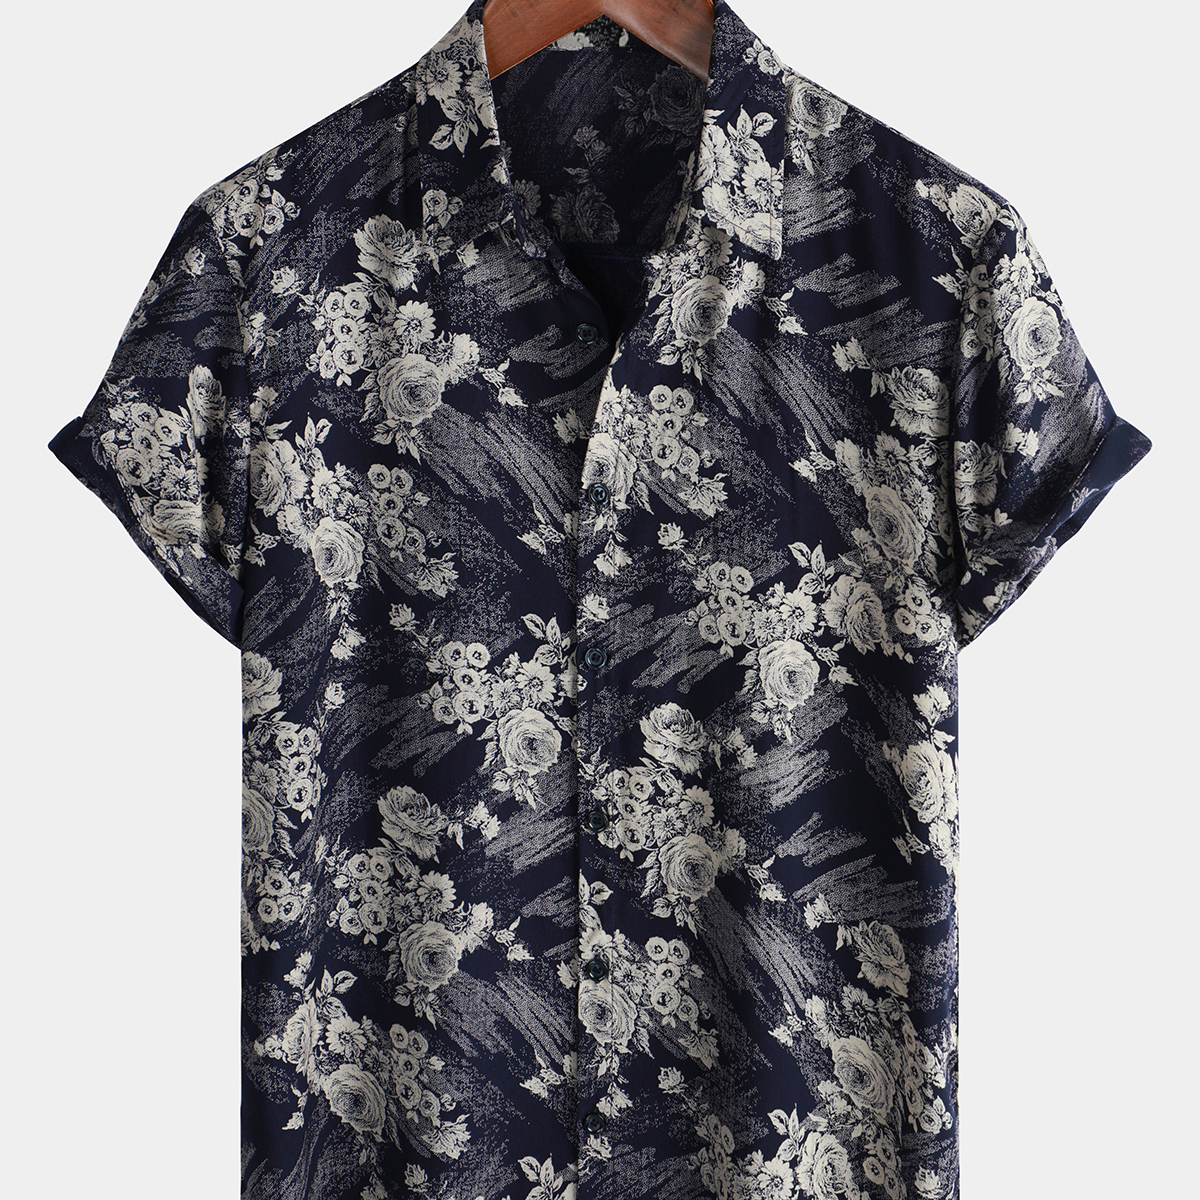 Men's Vintage Floral Holiday Beach Summer Casual Short Sleeve Button Up Shirt